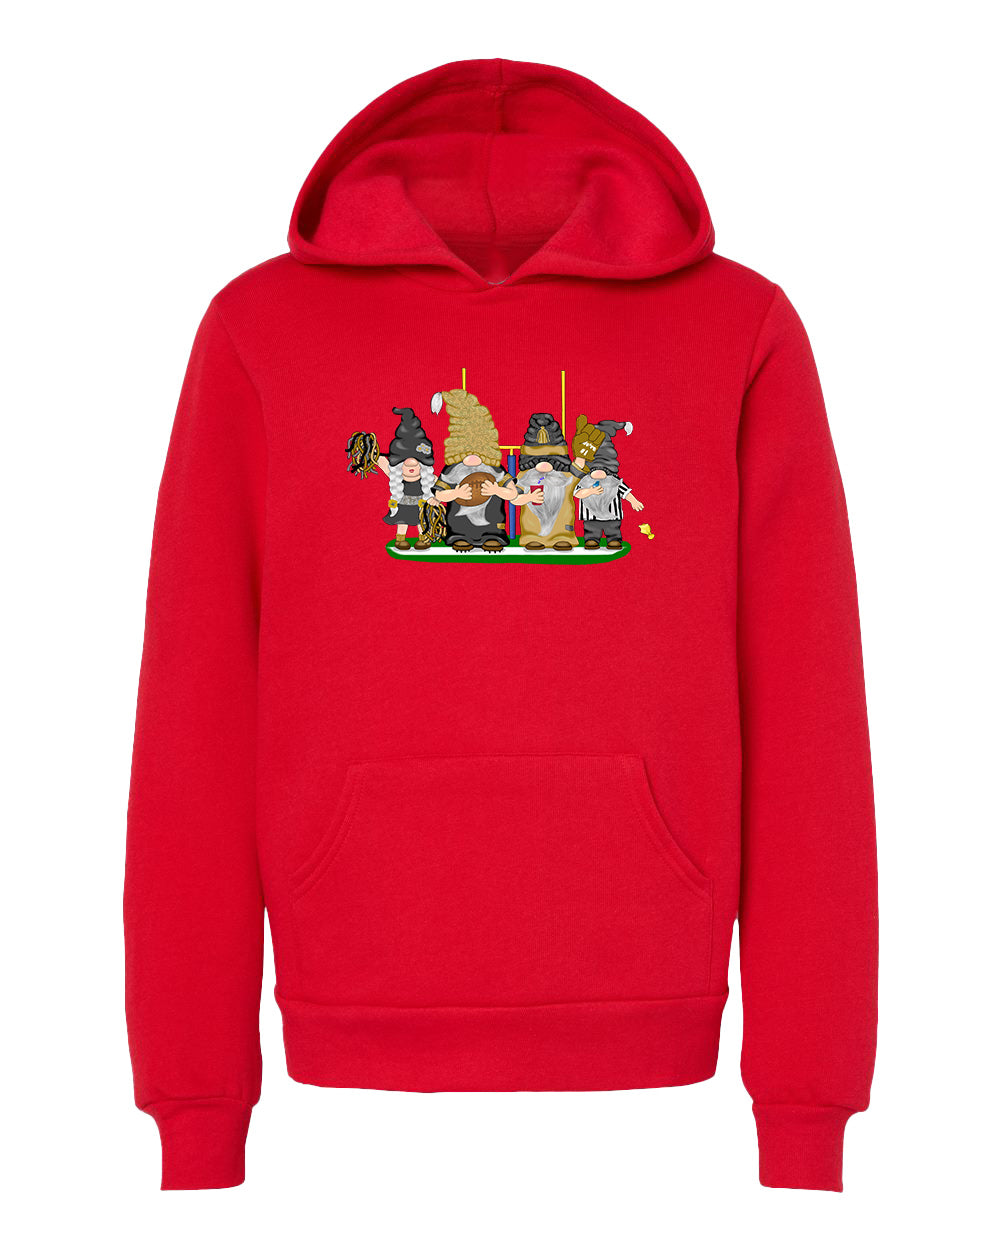 Gold & Black Football Gnomes  (similar to New Orleans) on Kids Hoodie